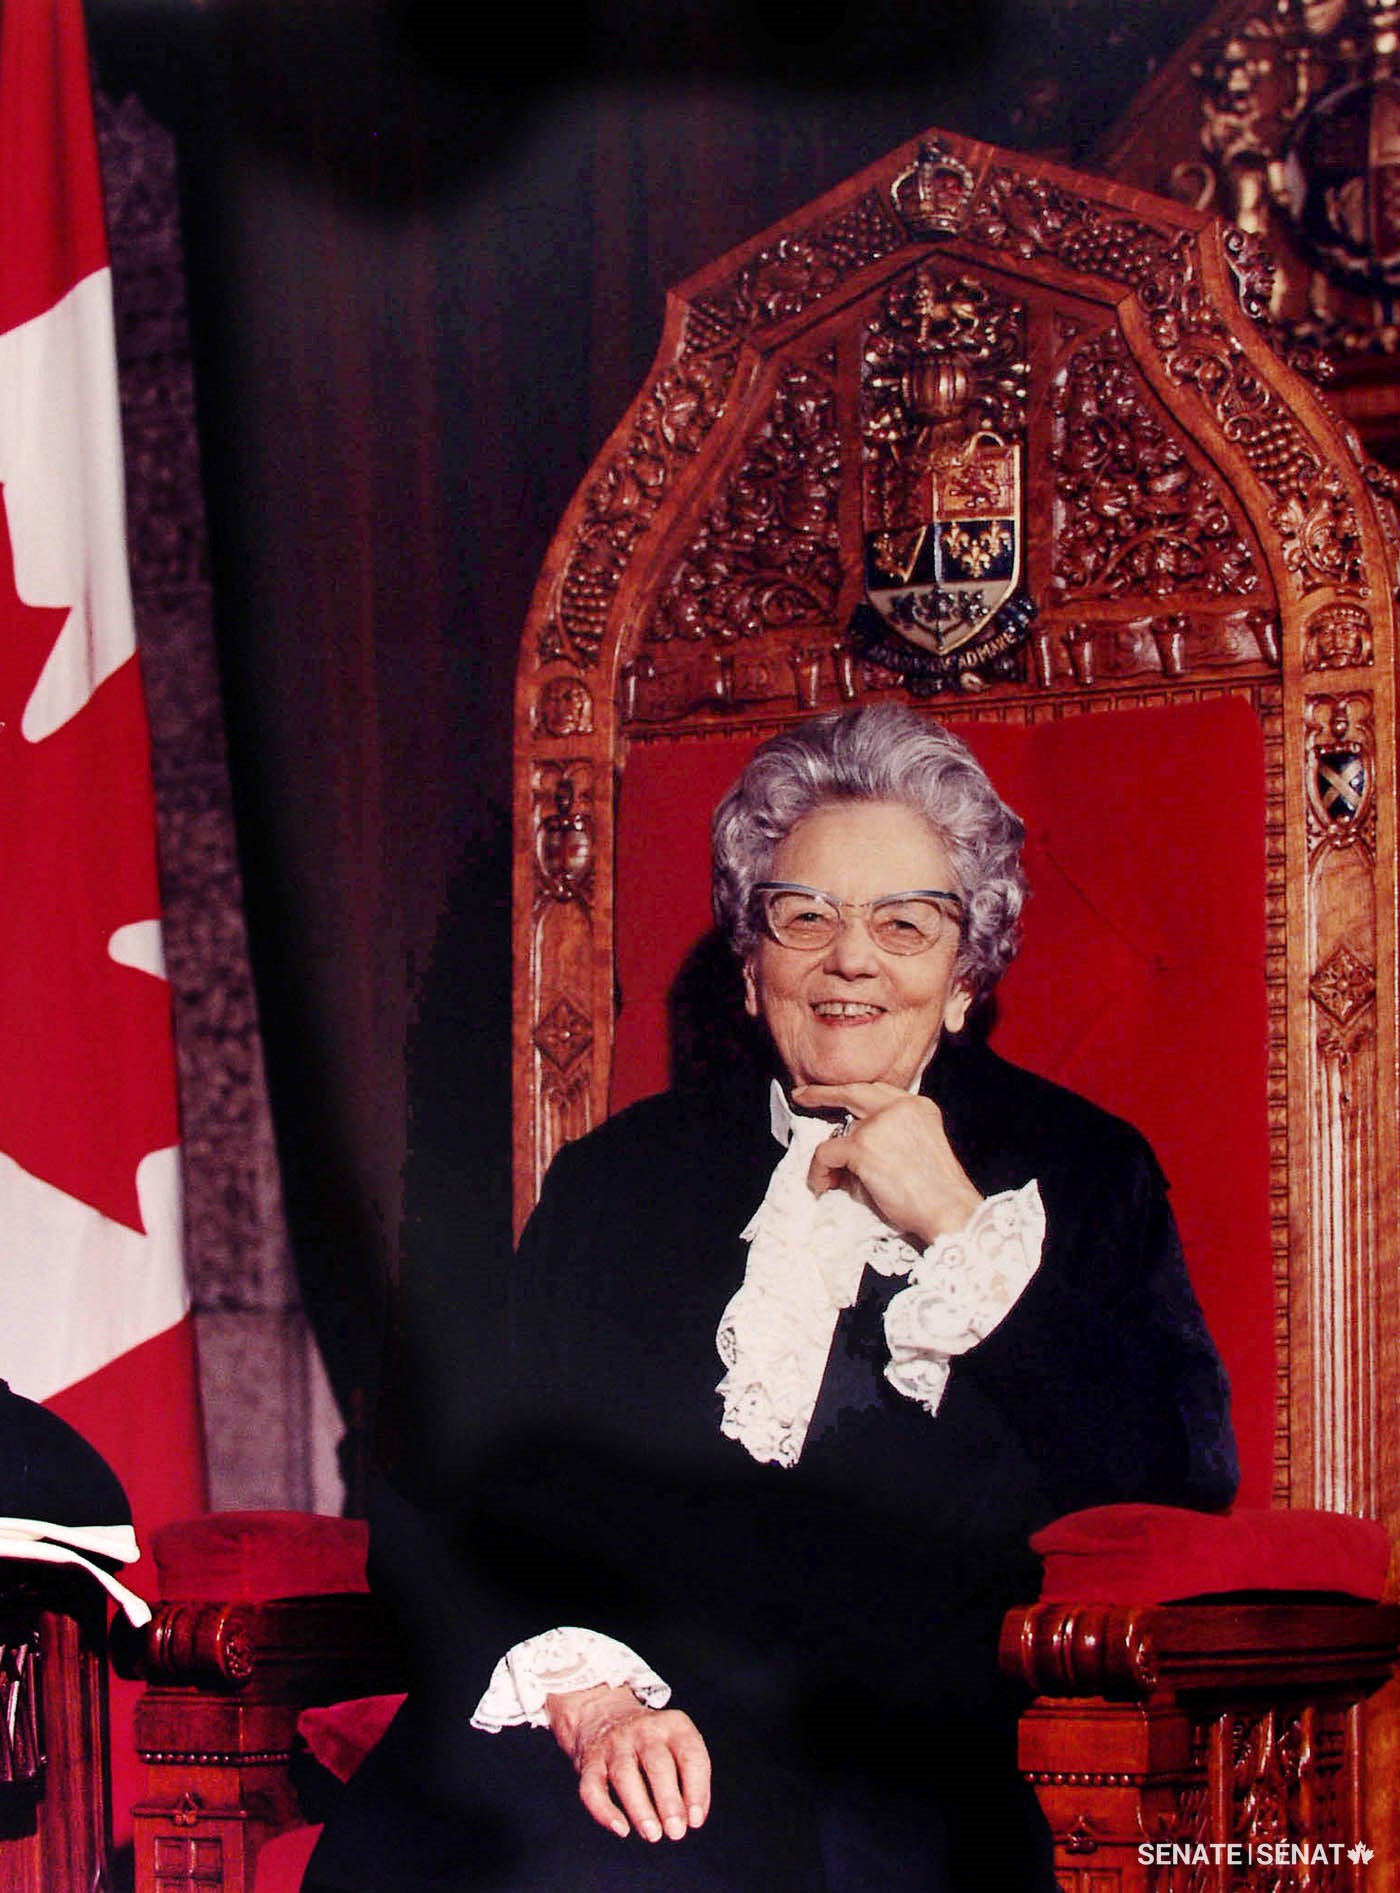 Senator Fergusson, photographed late in her career, sits in the Senate Speaker’s Chair.